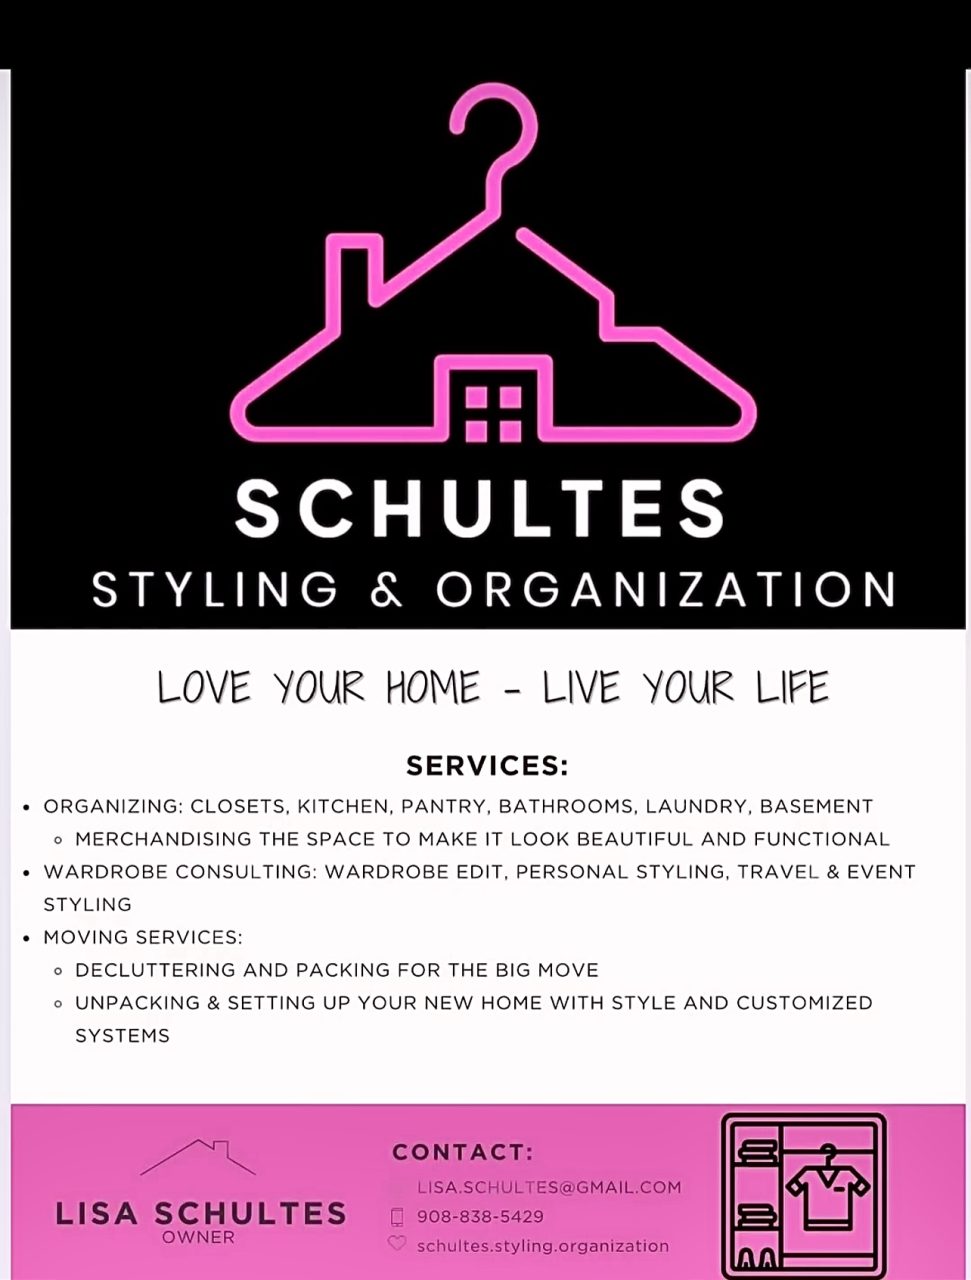 Shultes Styling & Organization, Introducing Shultes Styling &amp; Organization